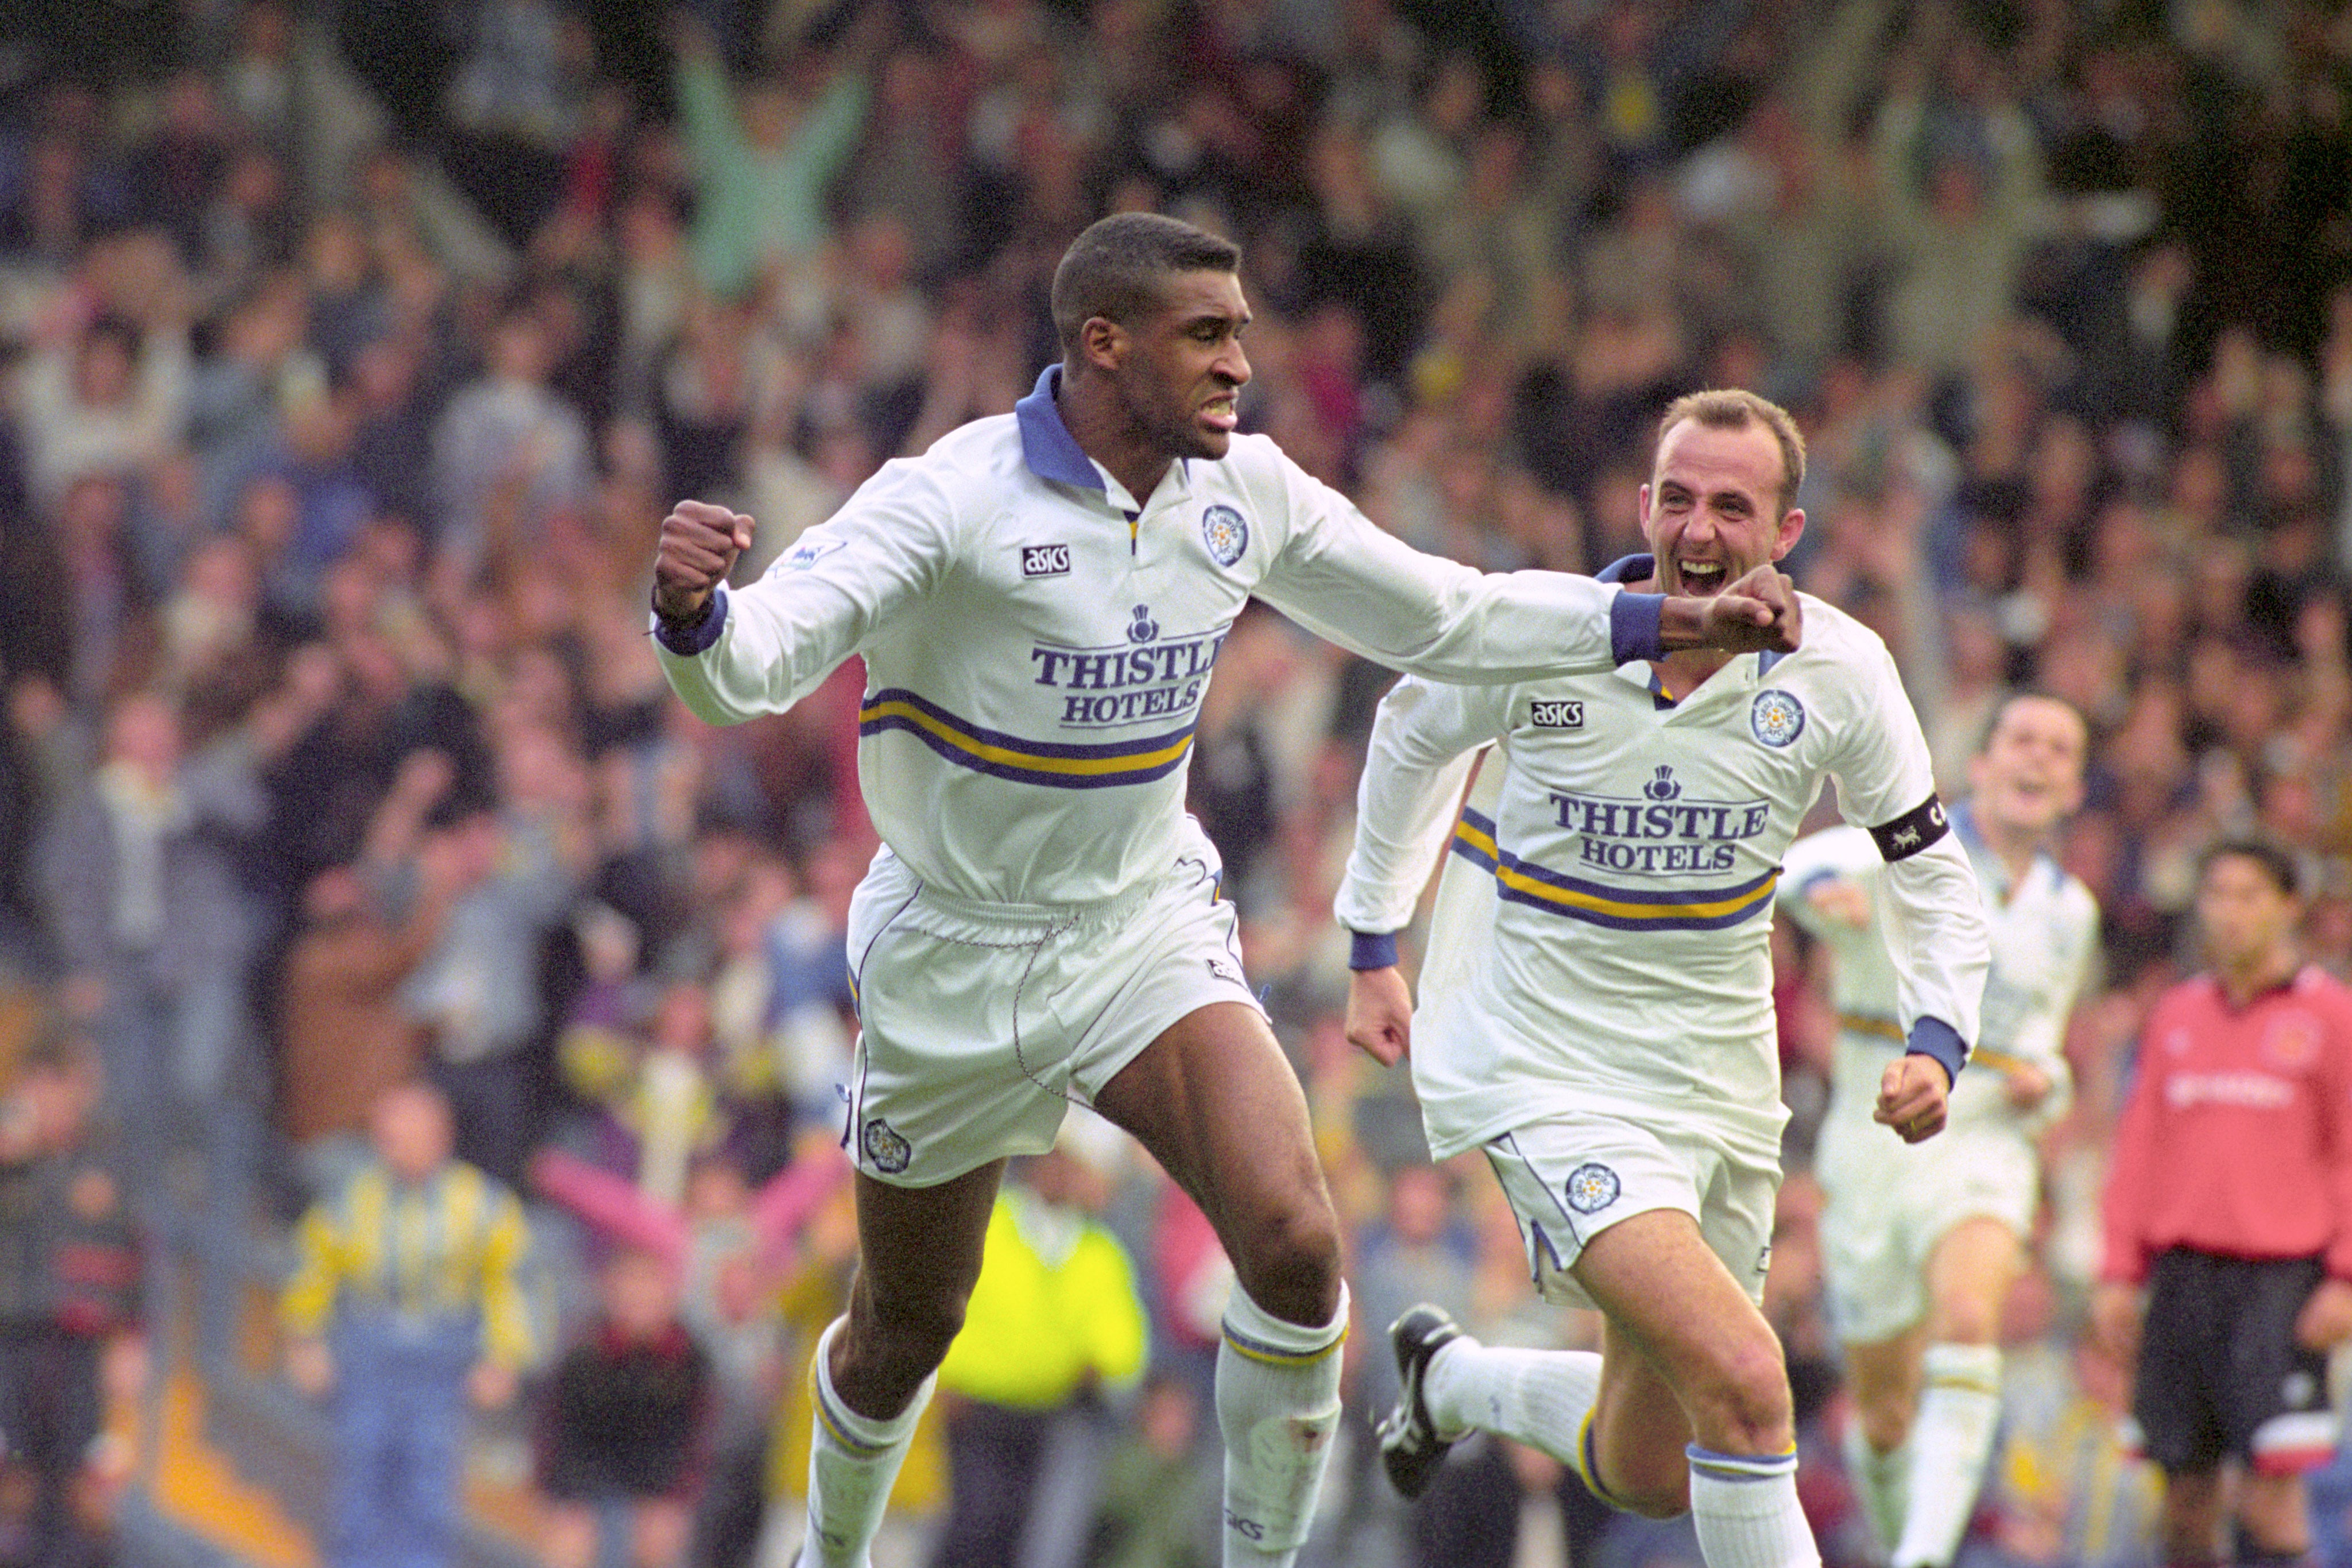 Brian Deane (left) was on target for Leeds